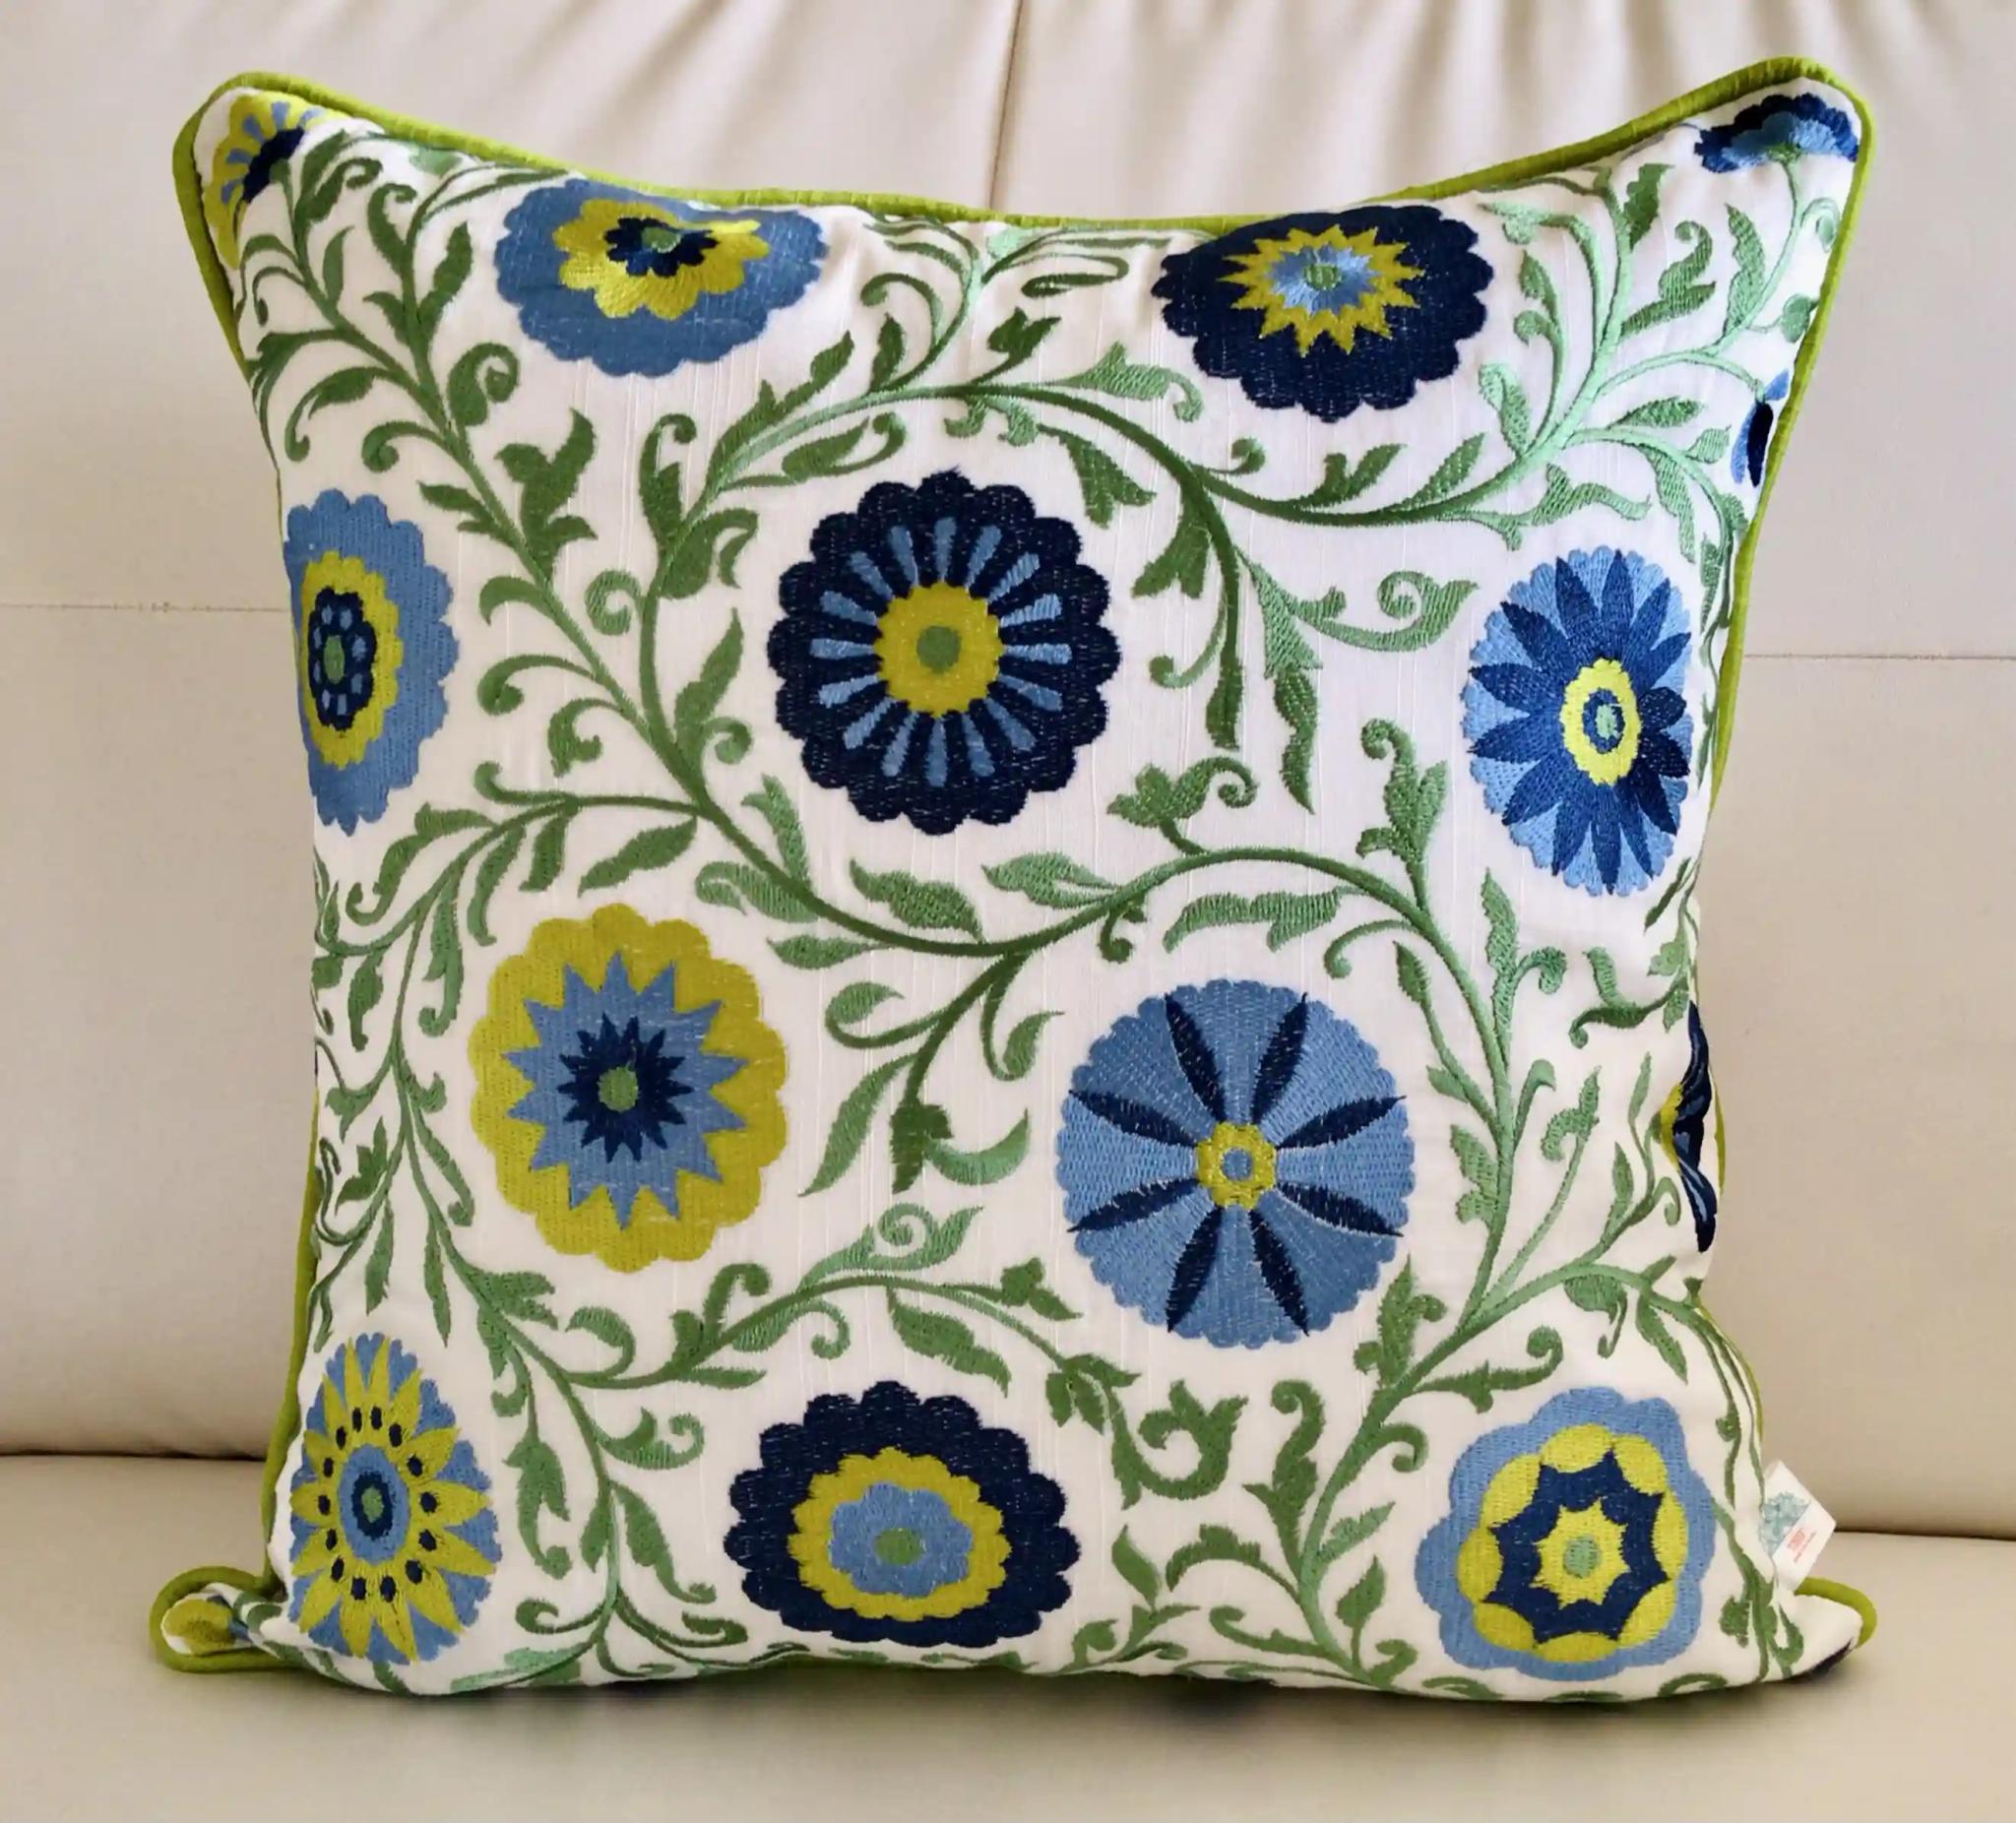 Shaan-e-Gulmarg-  Embroidered Cotton Silk Cushion Cover- Blue & Green- Set of 2